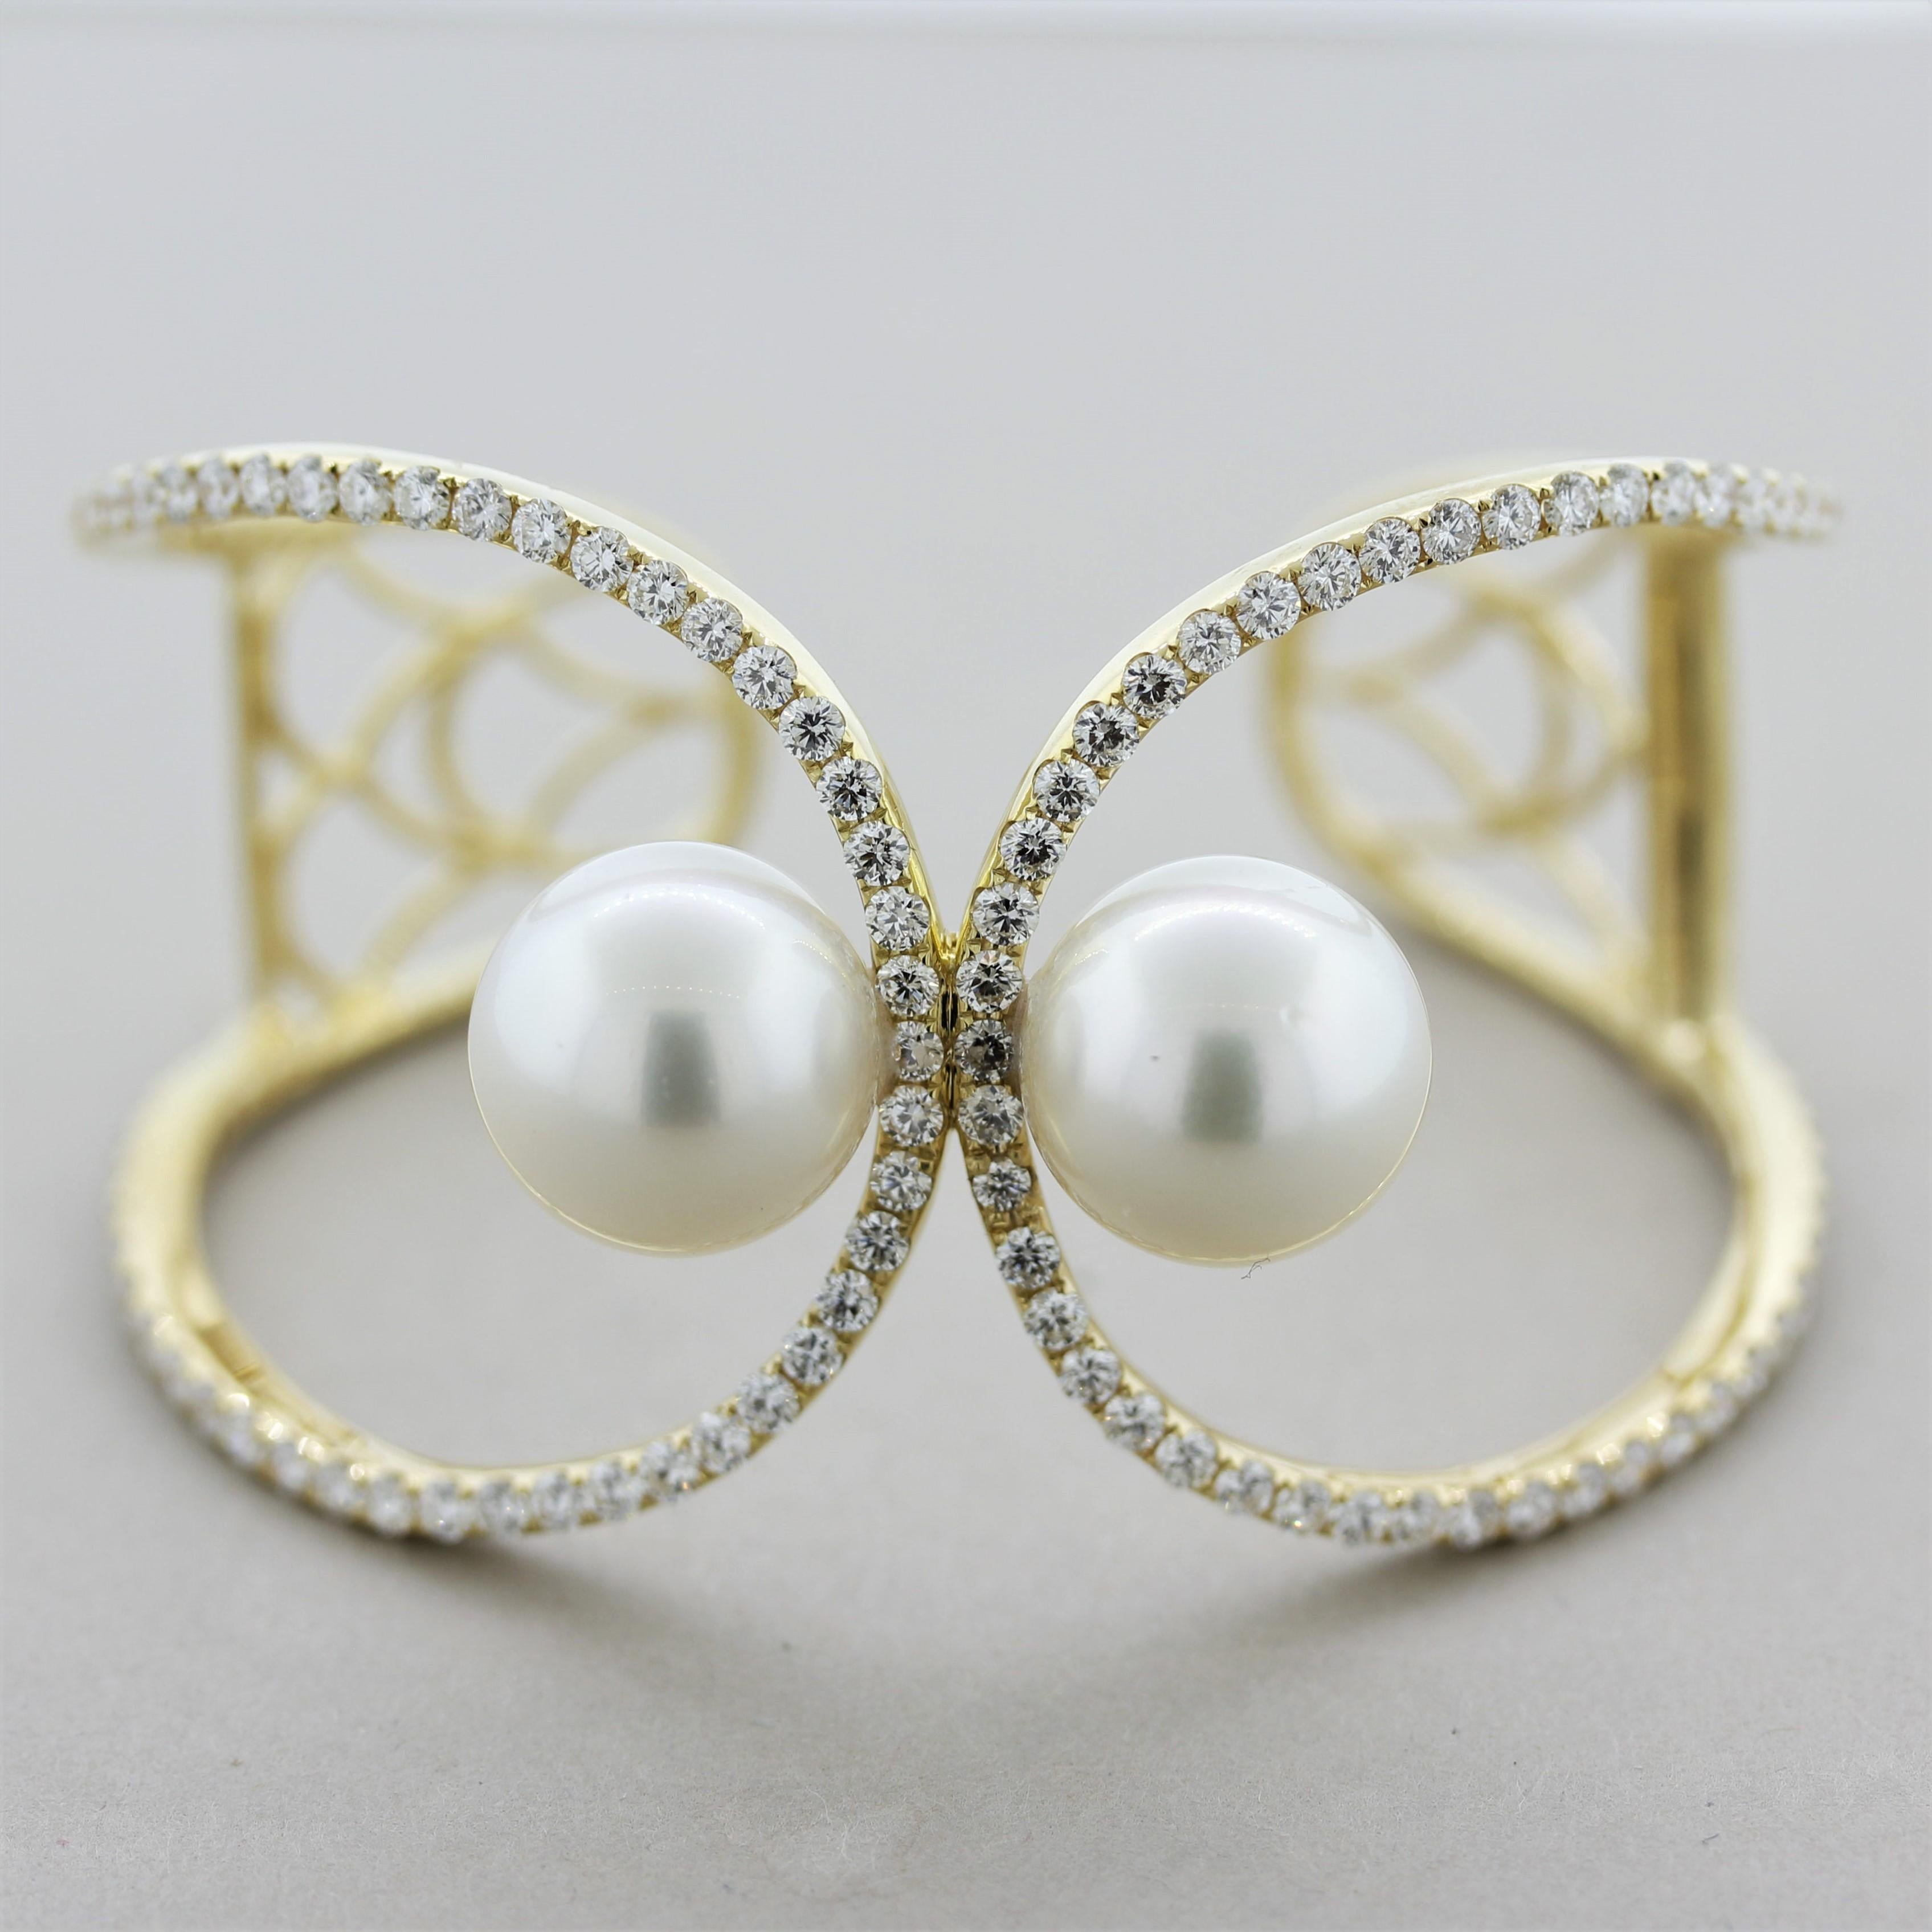 A unique cuff bracelet featuring two round marching South Sea pearls measuring 14.5mm each. Running along the cuff are 4.72 carats of round brilliant-cut diamonds which add brilliance and sparkle to the piece. Made in 18k yellow gold and ready to be